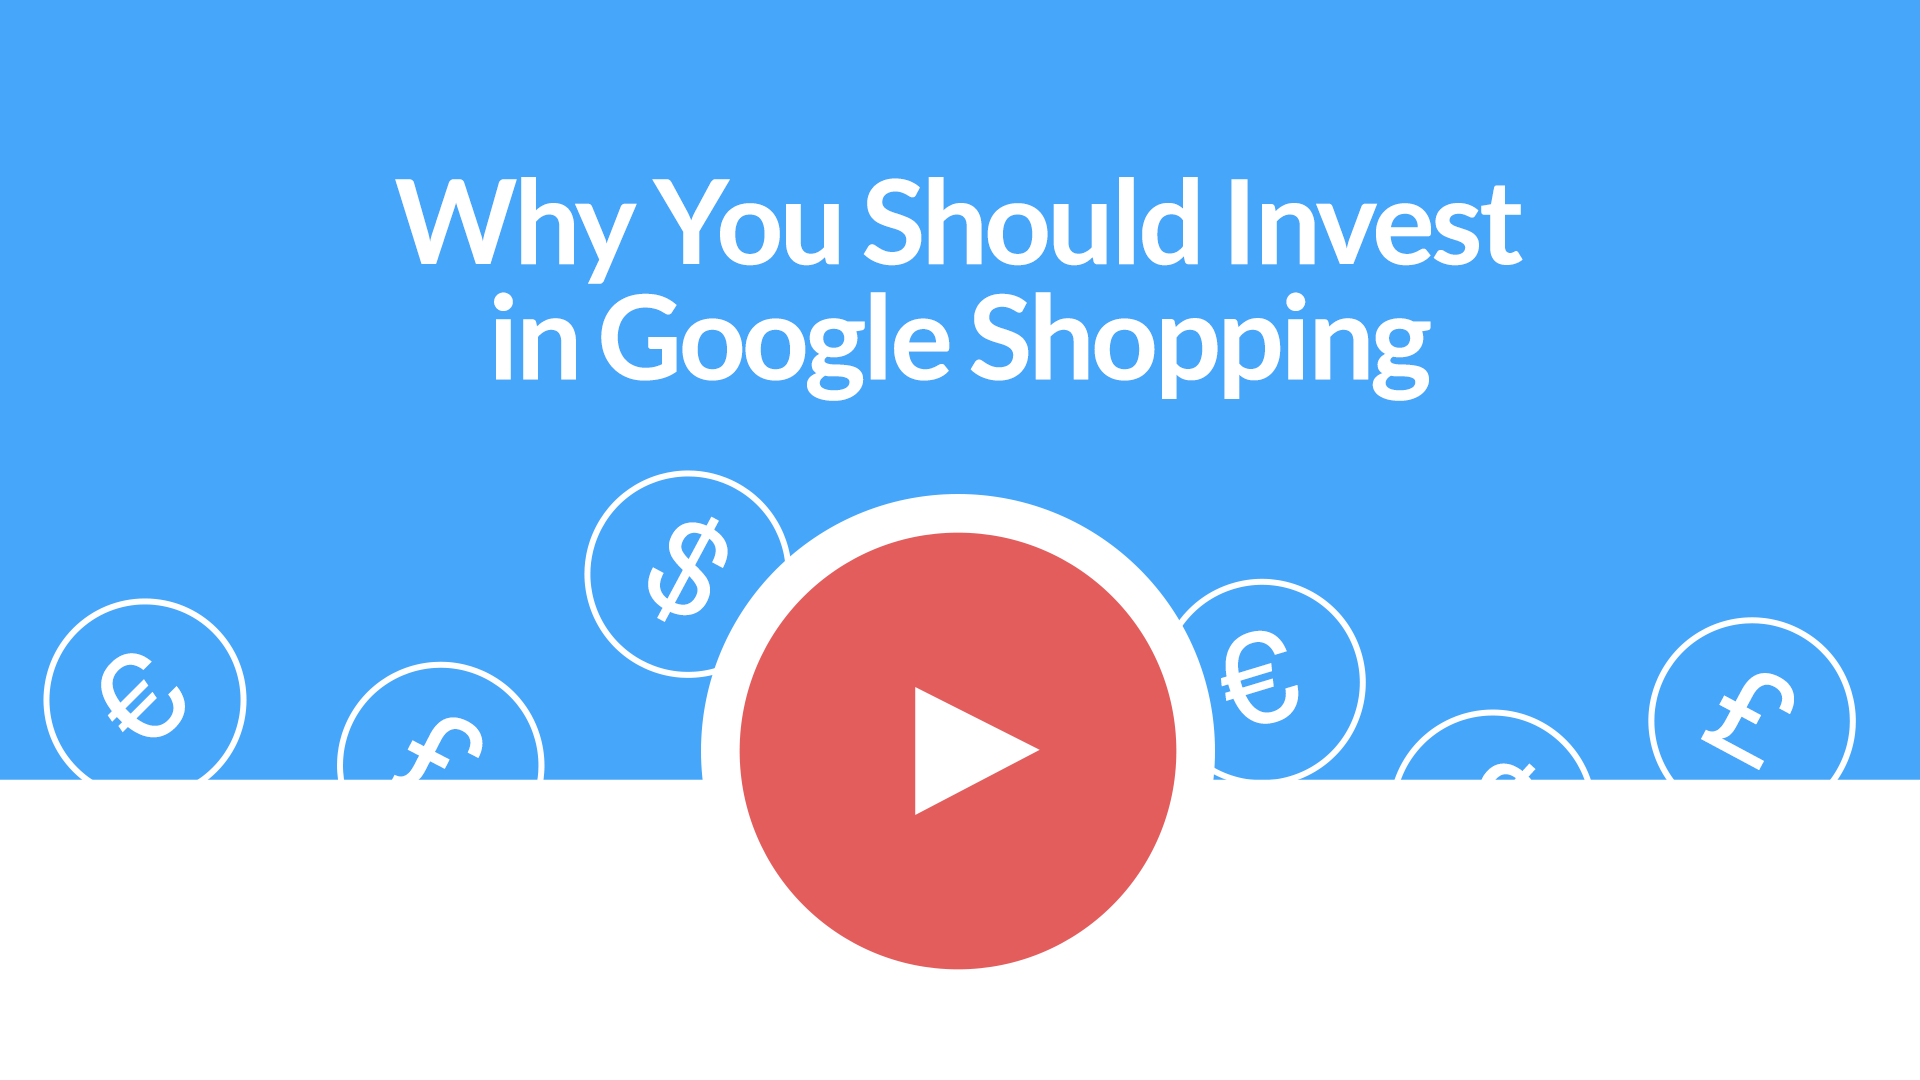 Why You Should Invest in Google Shopping